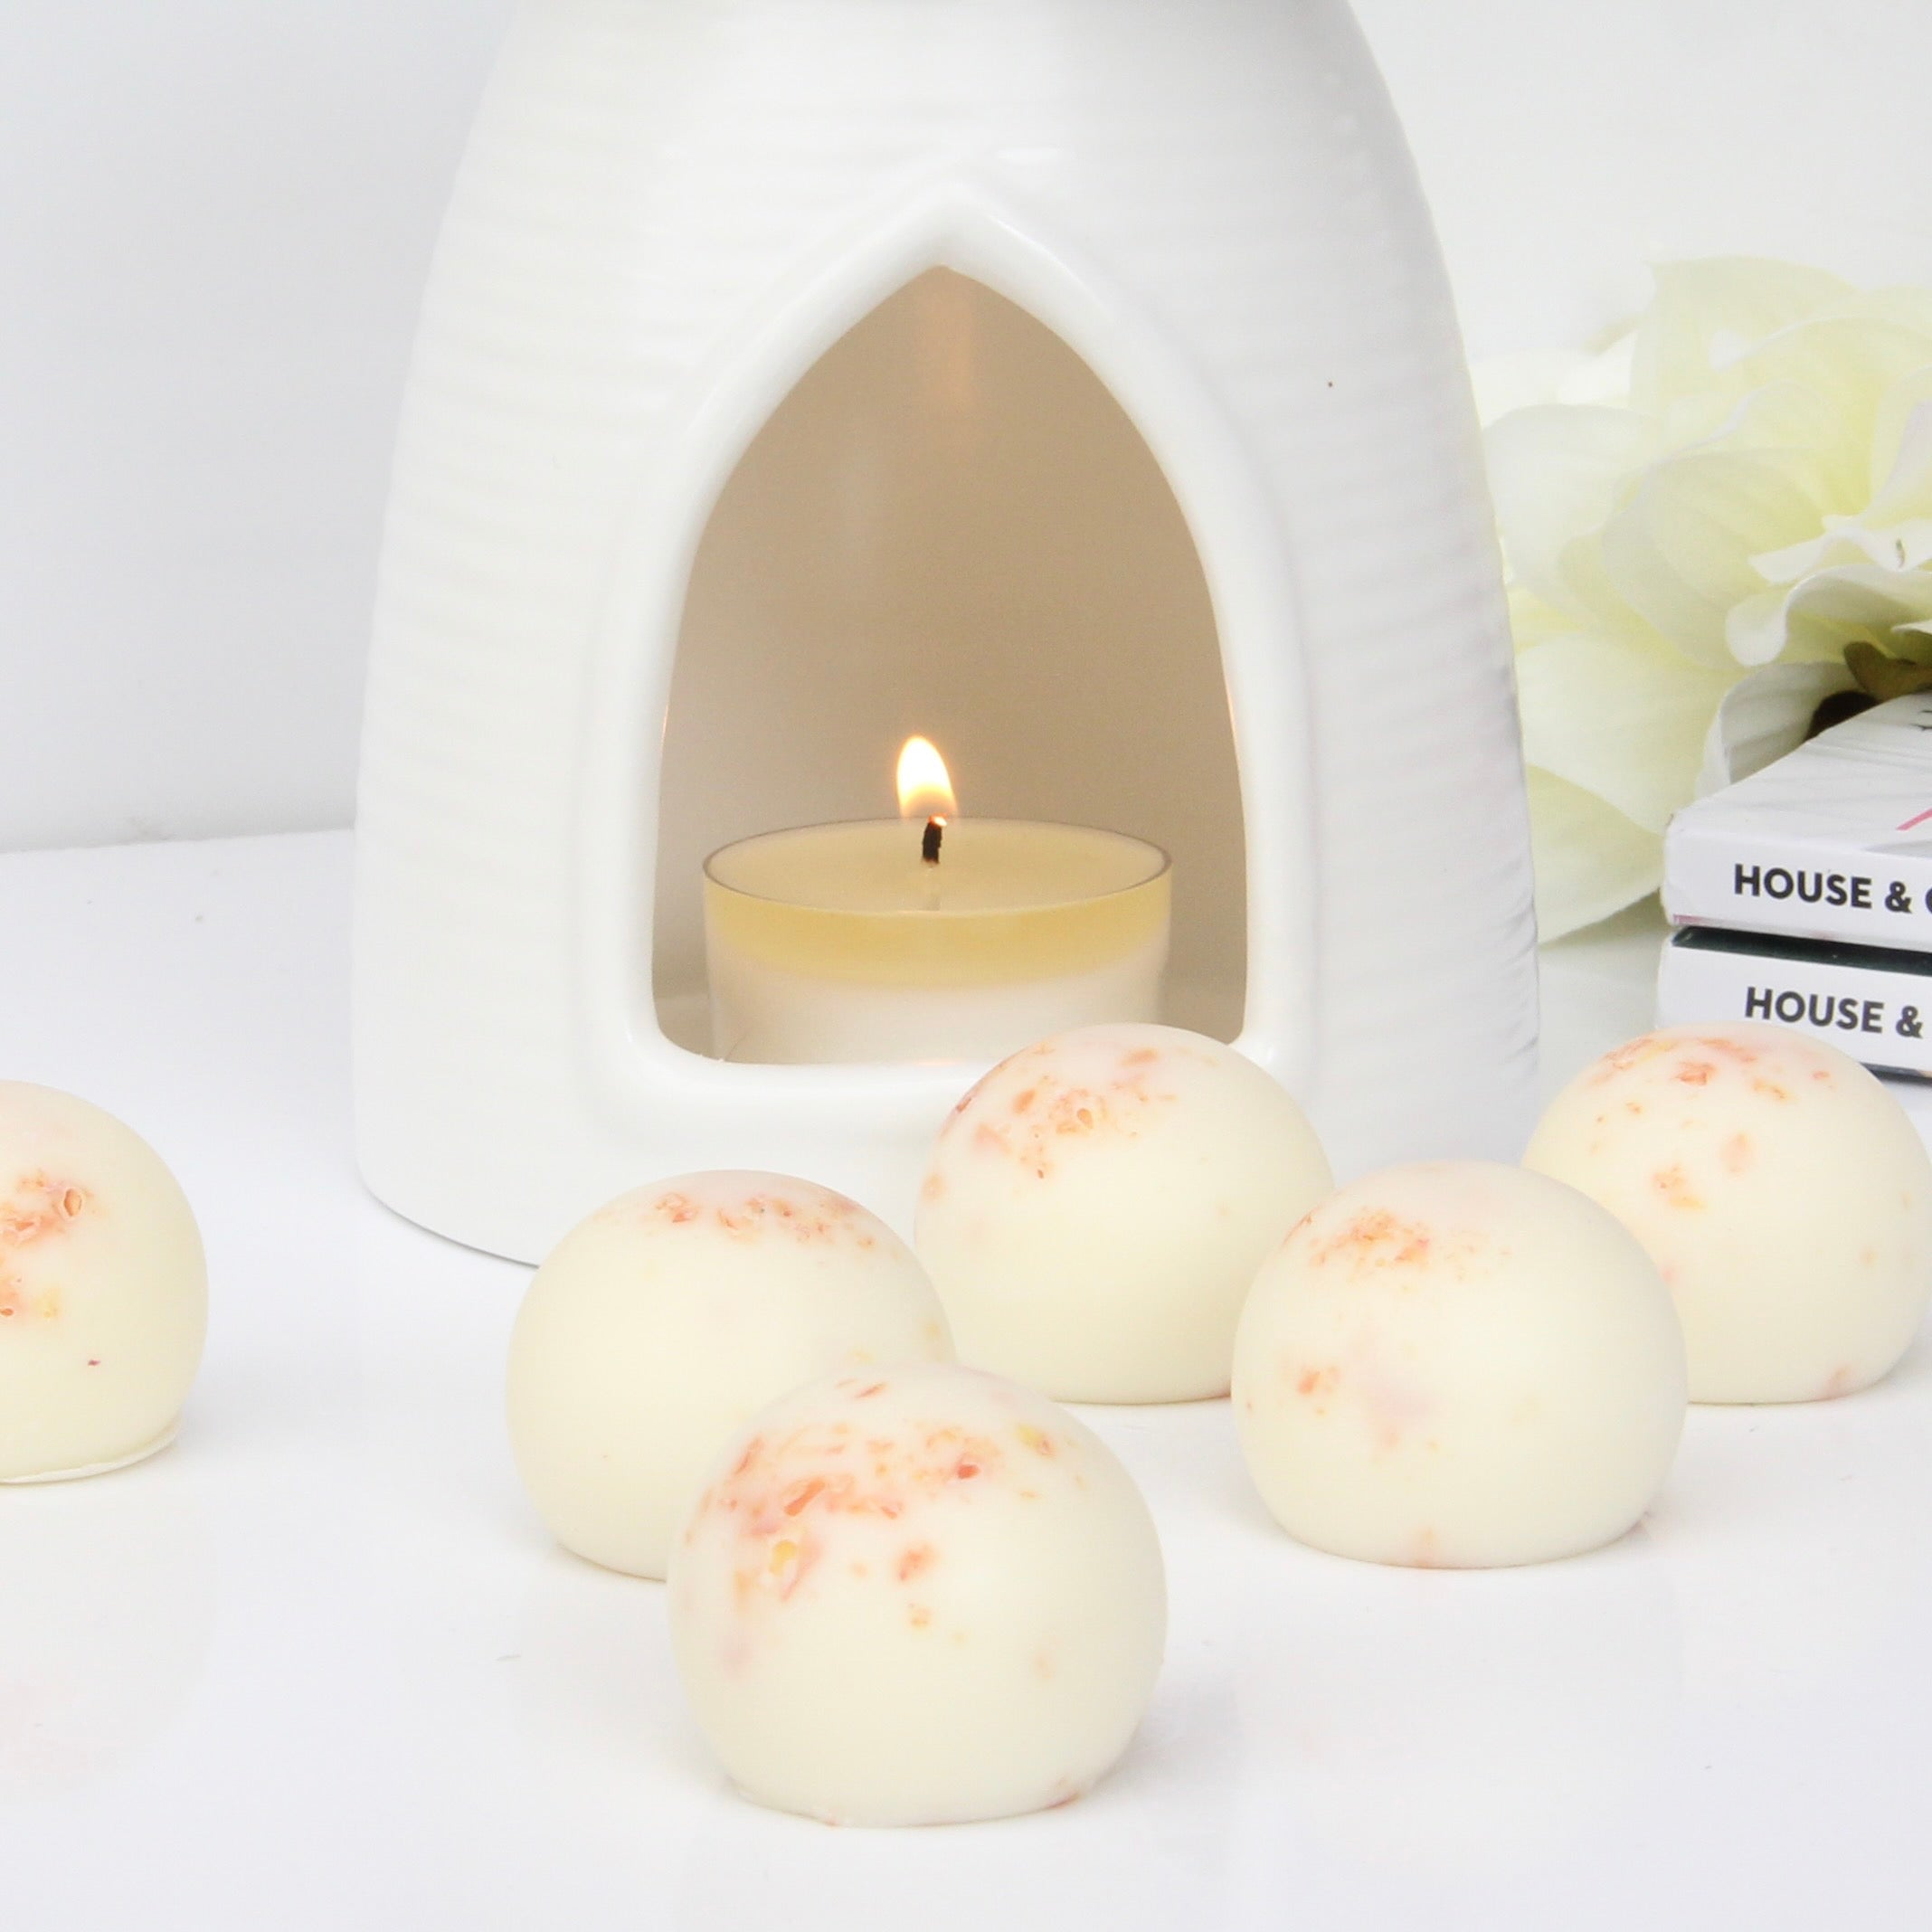 Citrus Relief Scented Wax Melts